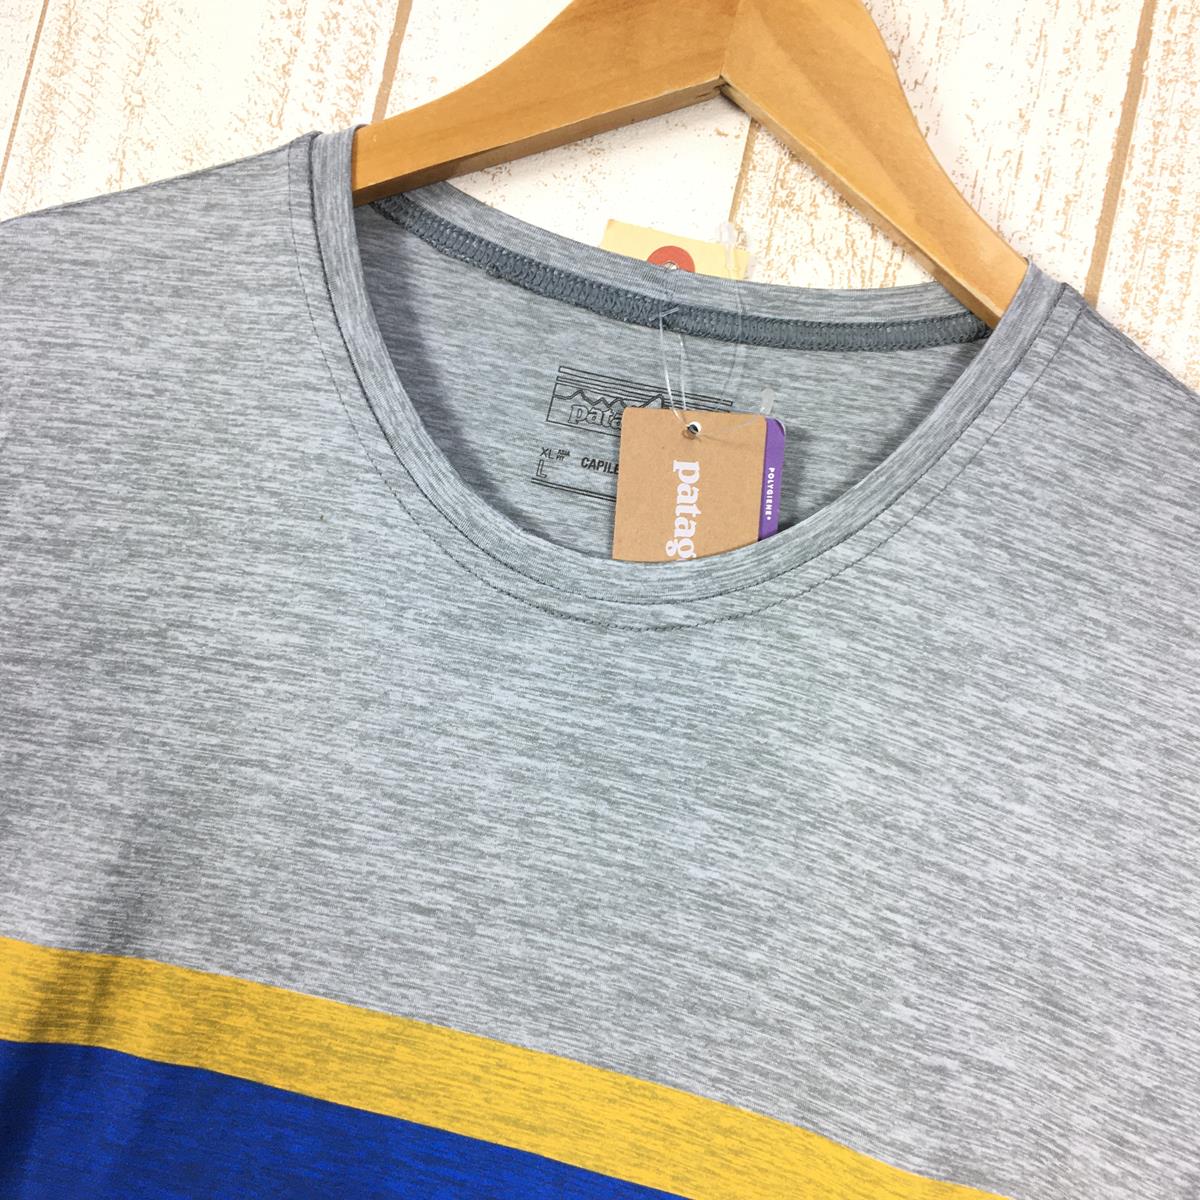 【MEN's L】 パタゴニア キャプリーン デイリー グラフィック Tシャツ CAPILENE DAILY GRAPHIC T-SHIRT PATAGONIA 45286 RSFE Rugby Stripe : Feather Grey グレー系